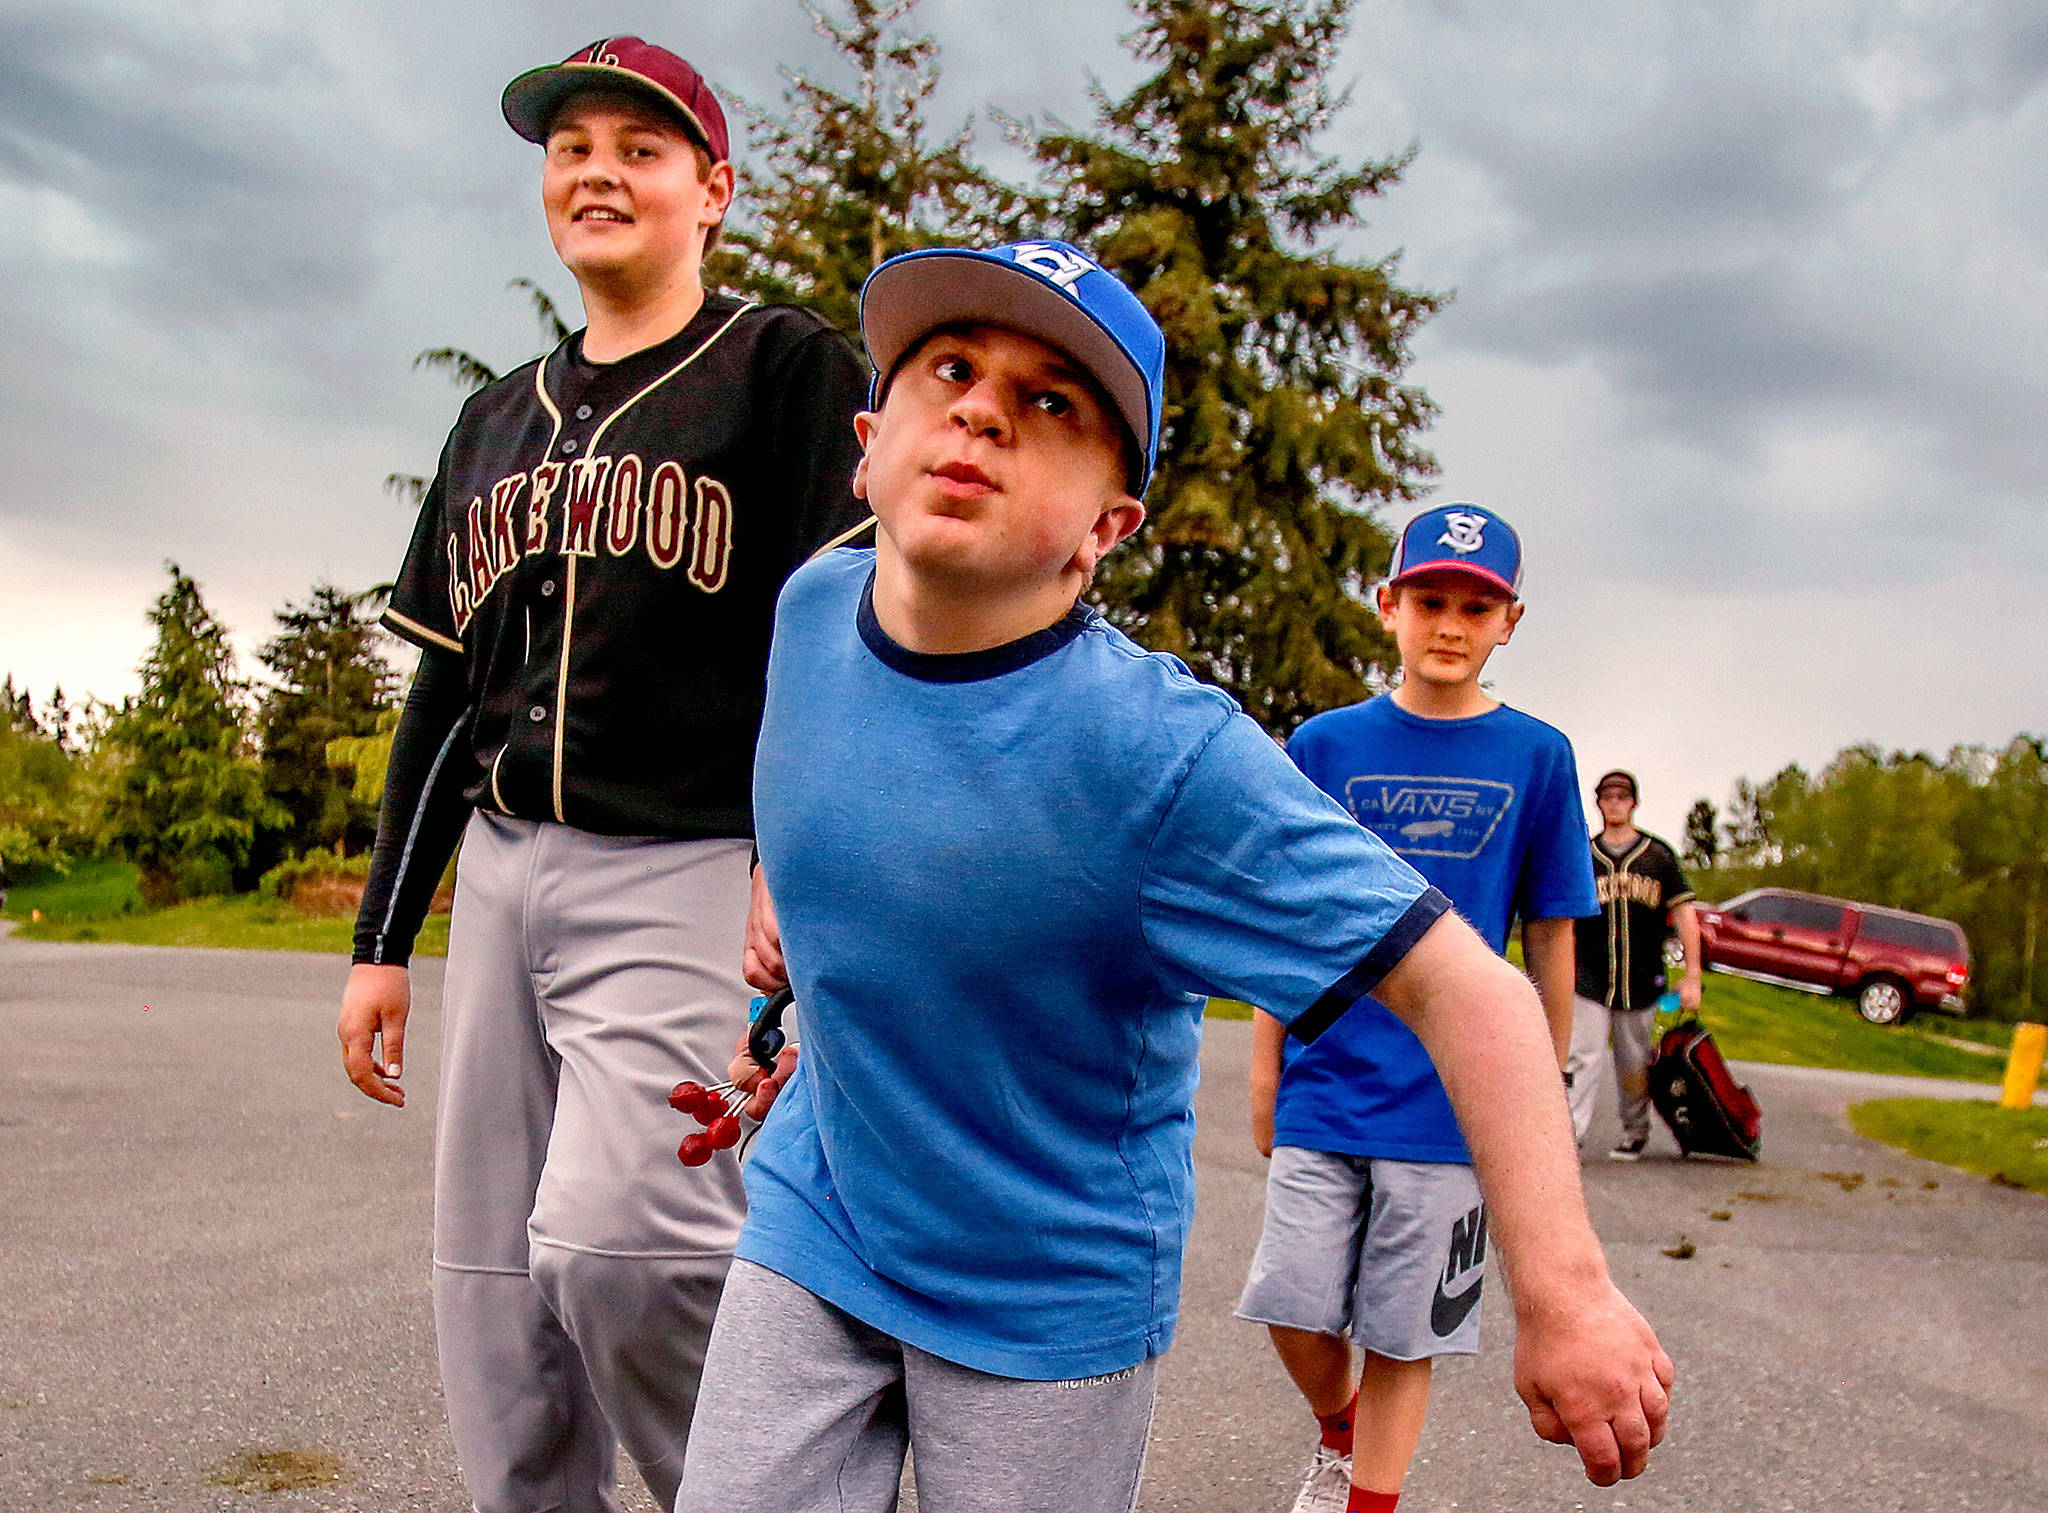 Brothers Matthew Irish, 15 (left), and Noah, 11, follow their older brother, Jacob, 16, as they walk to their car from the baseball field at Lakewood Middle School on Thursday after games were canceled by lightning. Jacob, who was born with life-threatening Hurler syndrome, is playing on a baseball team for the first time. (Dan Bates / The Herald)